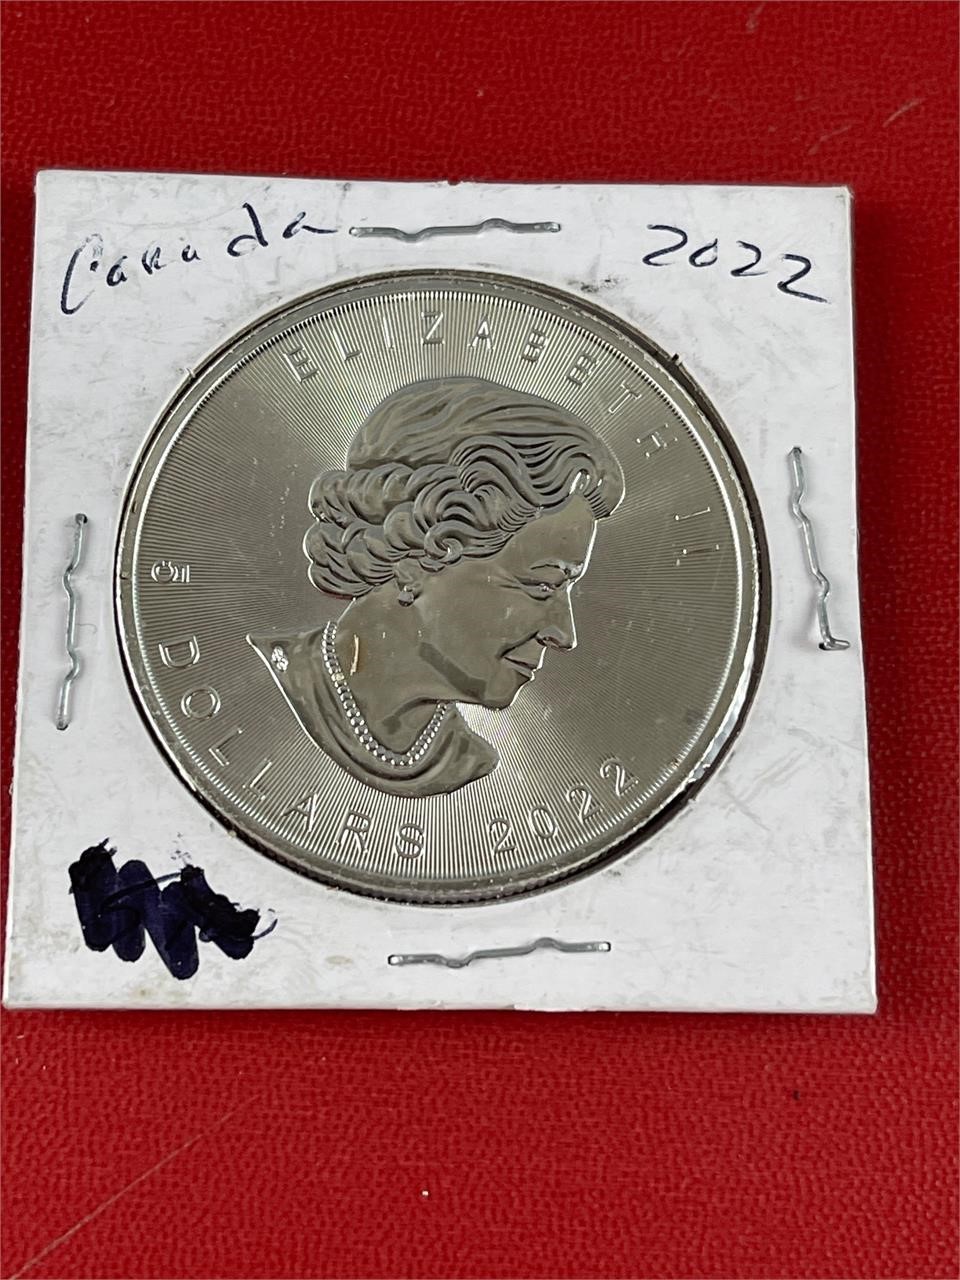 2022 SILVER CANADIAN MAPLE LEAF COIN